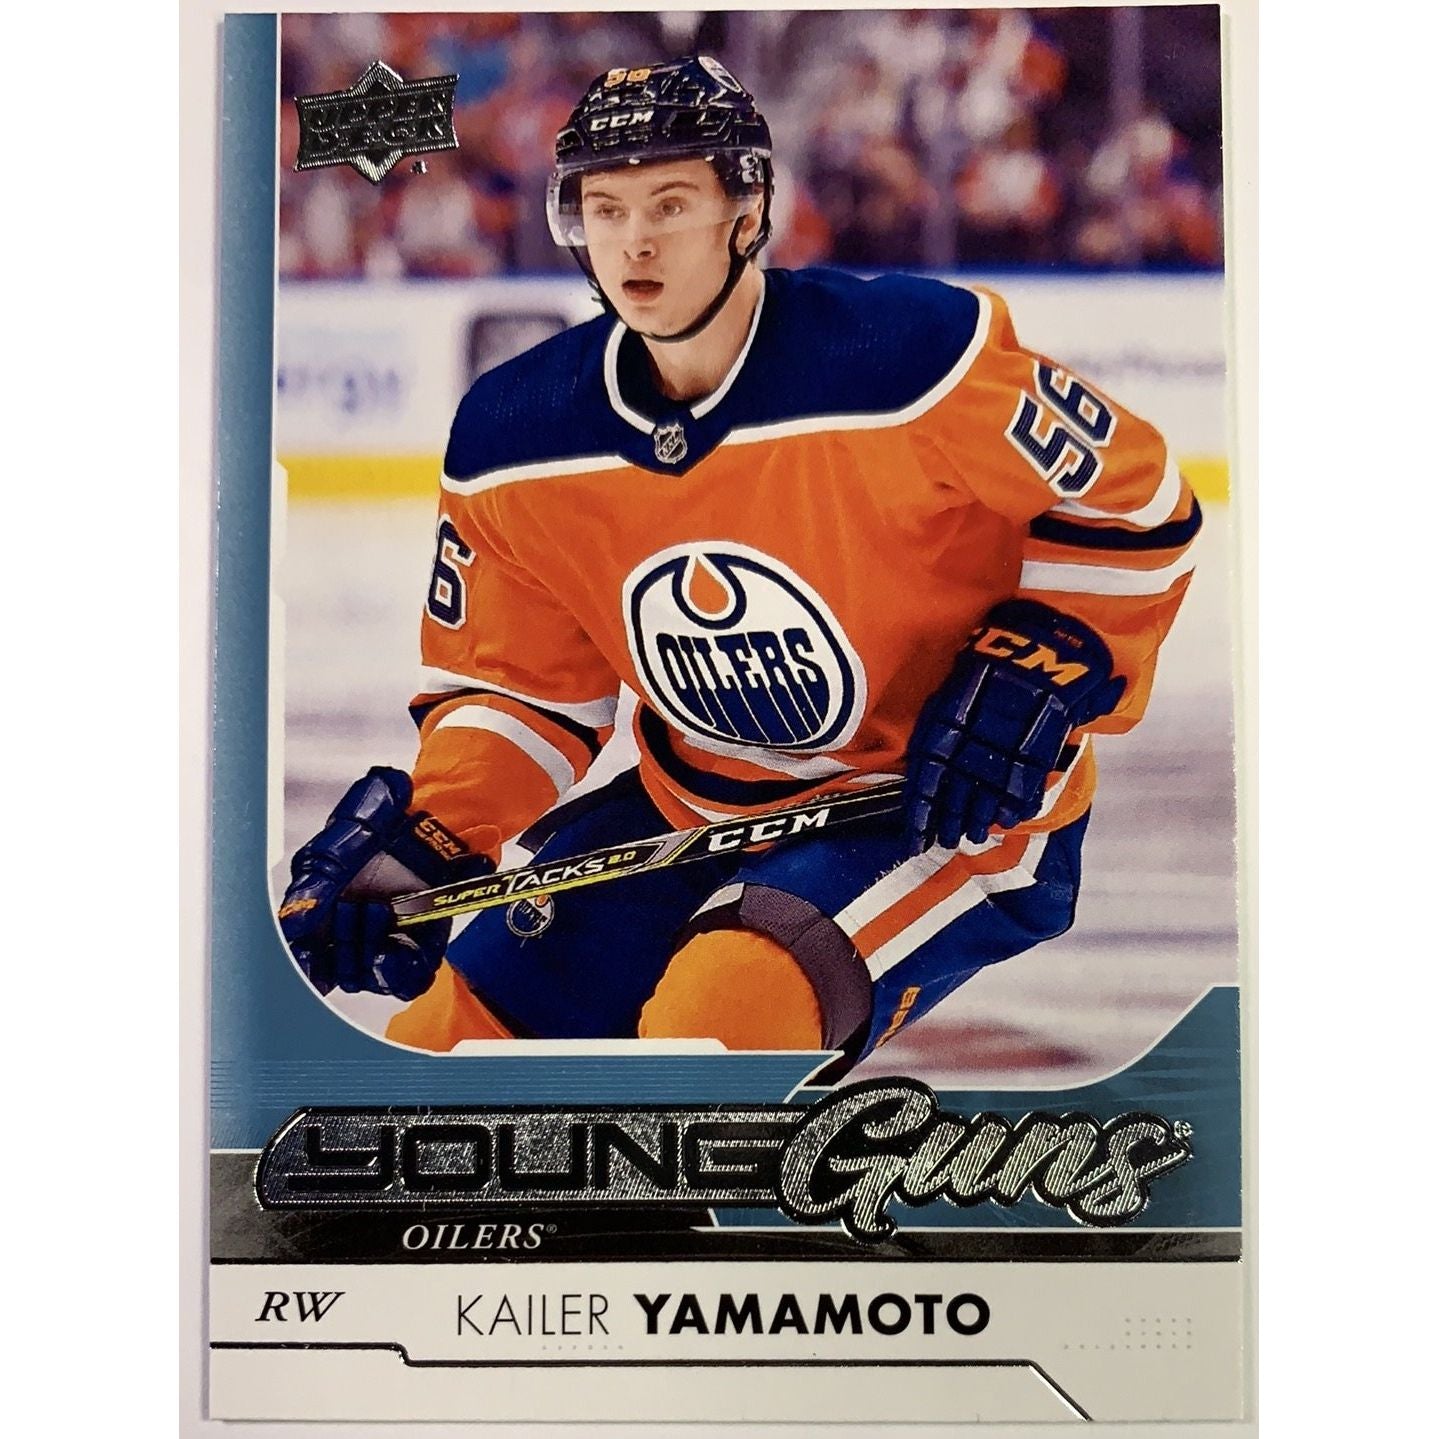  2017-18 Upper Deck Series 1 Kailer Yamamoto Young Guns  Local Legends Cards & Collectibles